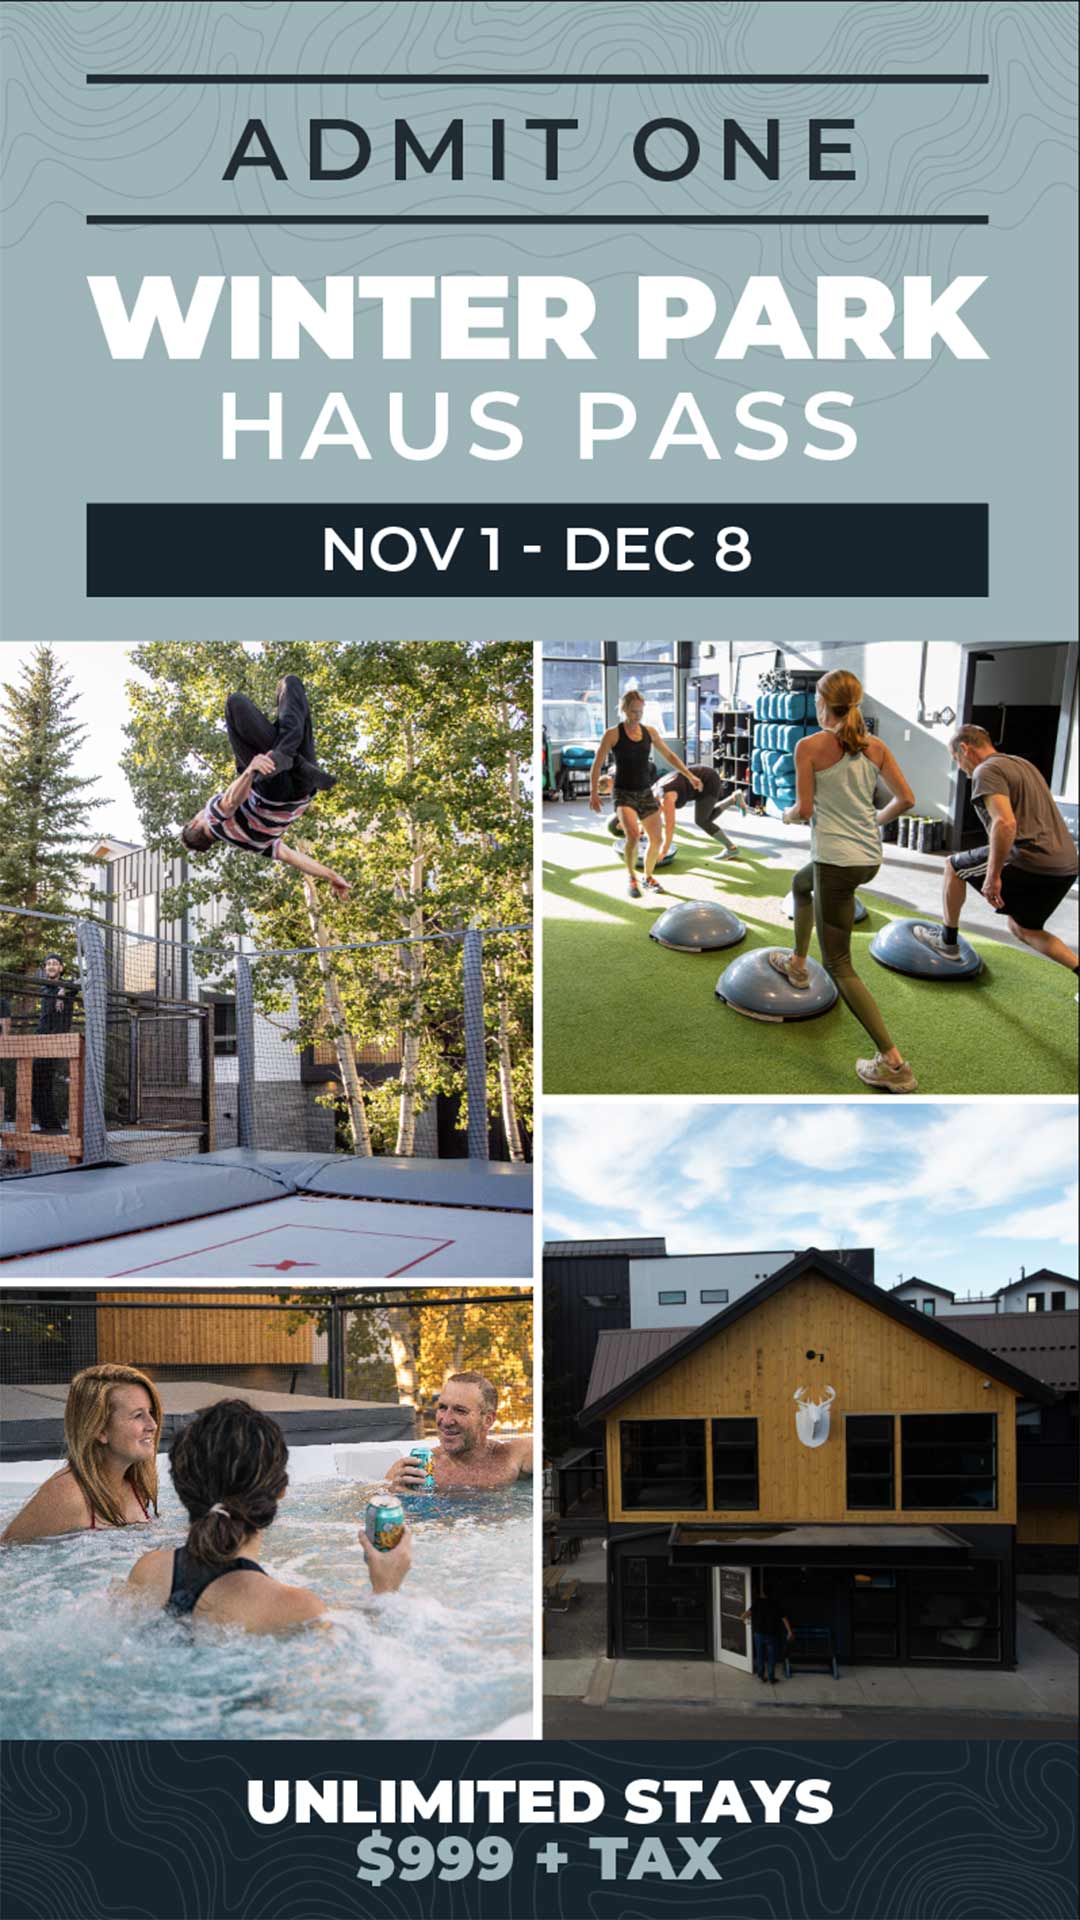 WINTER PARK HAUS PASS FOR GH MEMBERS